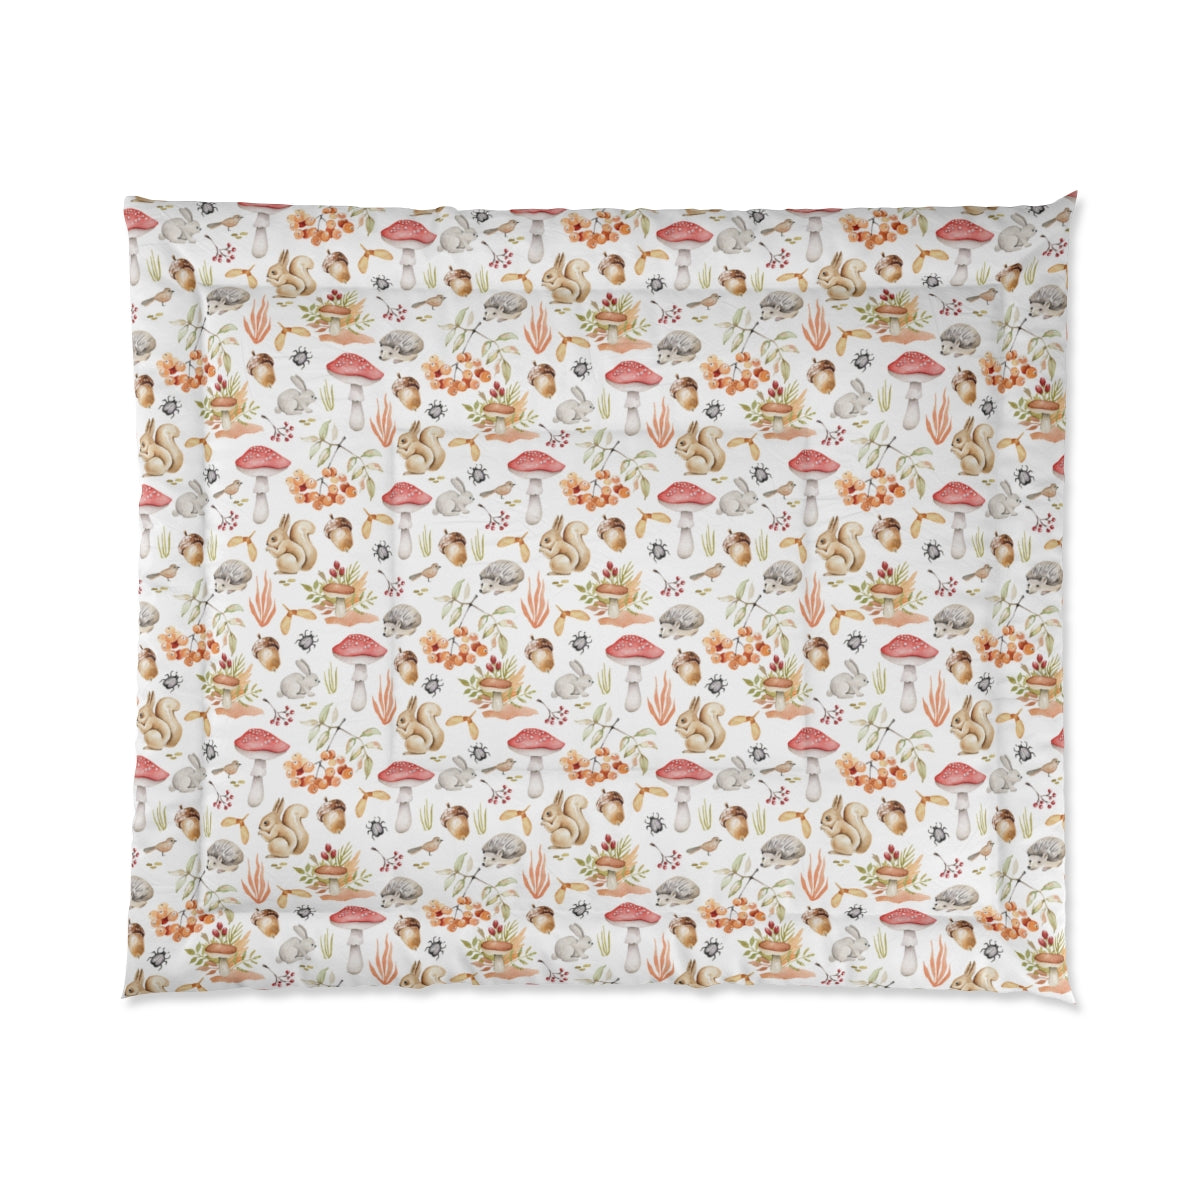 Fall Forest Animals Comforter